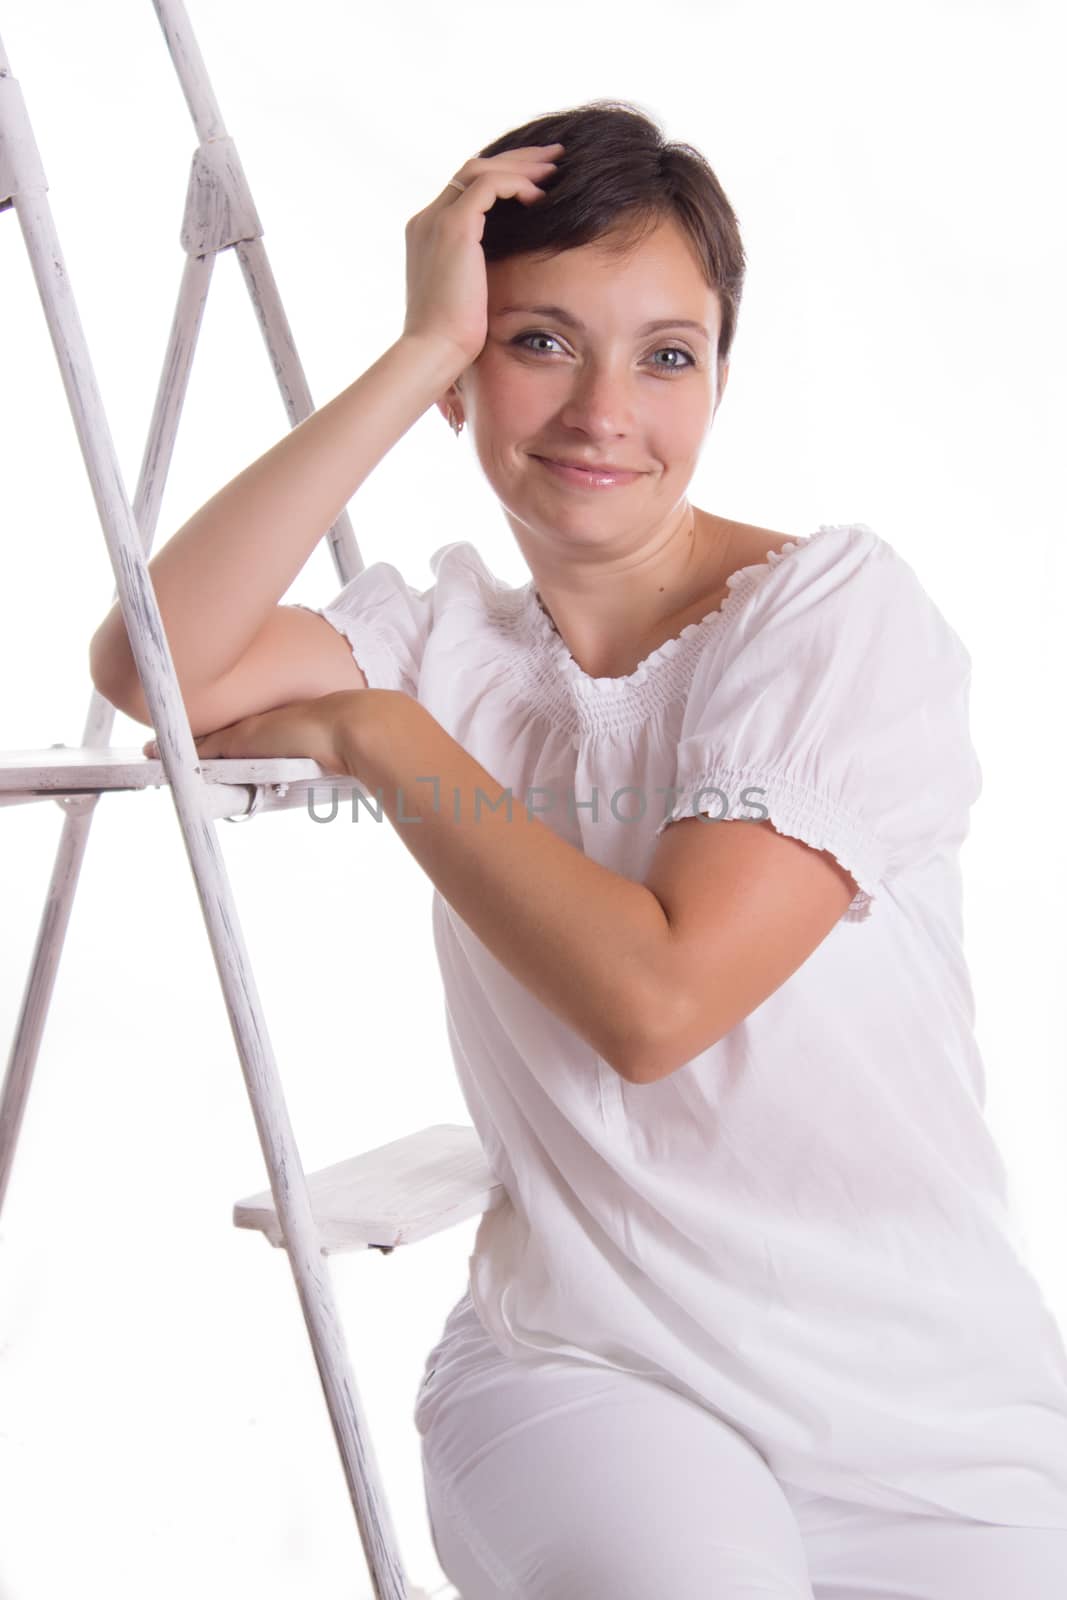 Smiling woman sitting on step ladder by Angel_a